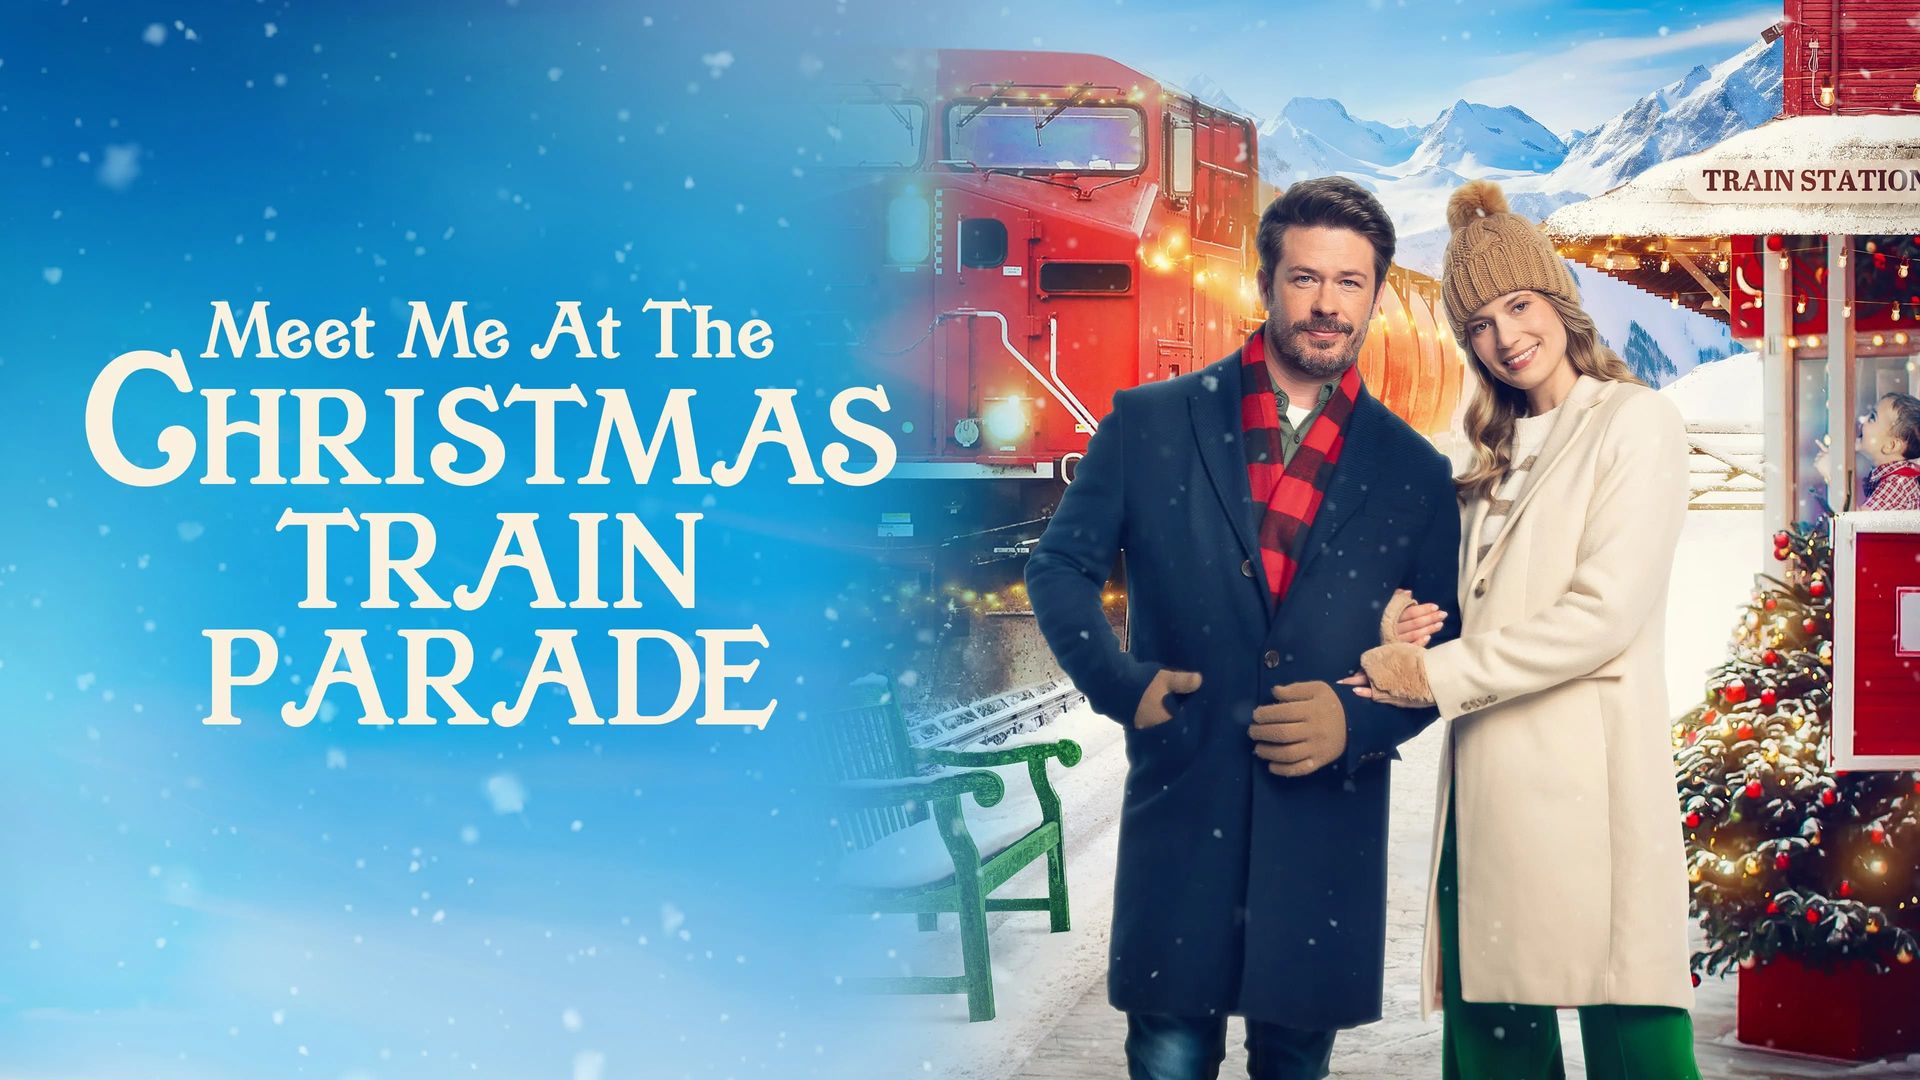 The Christmas Train Parade background